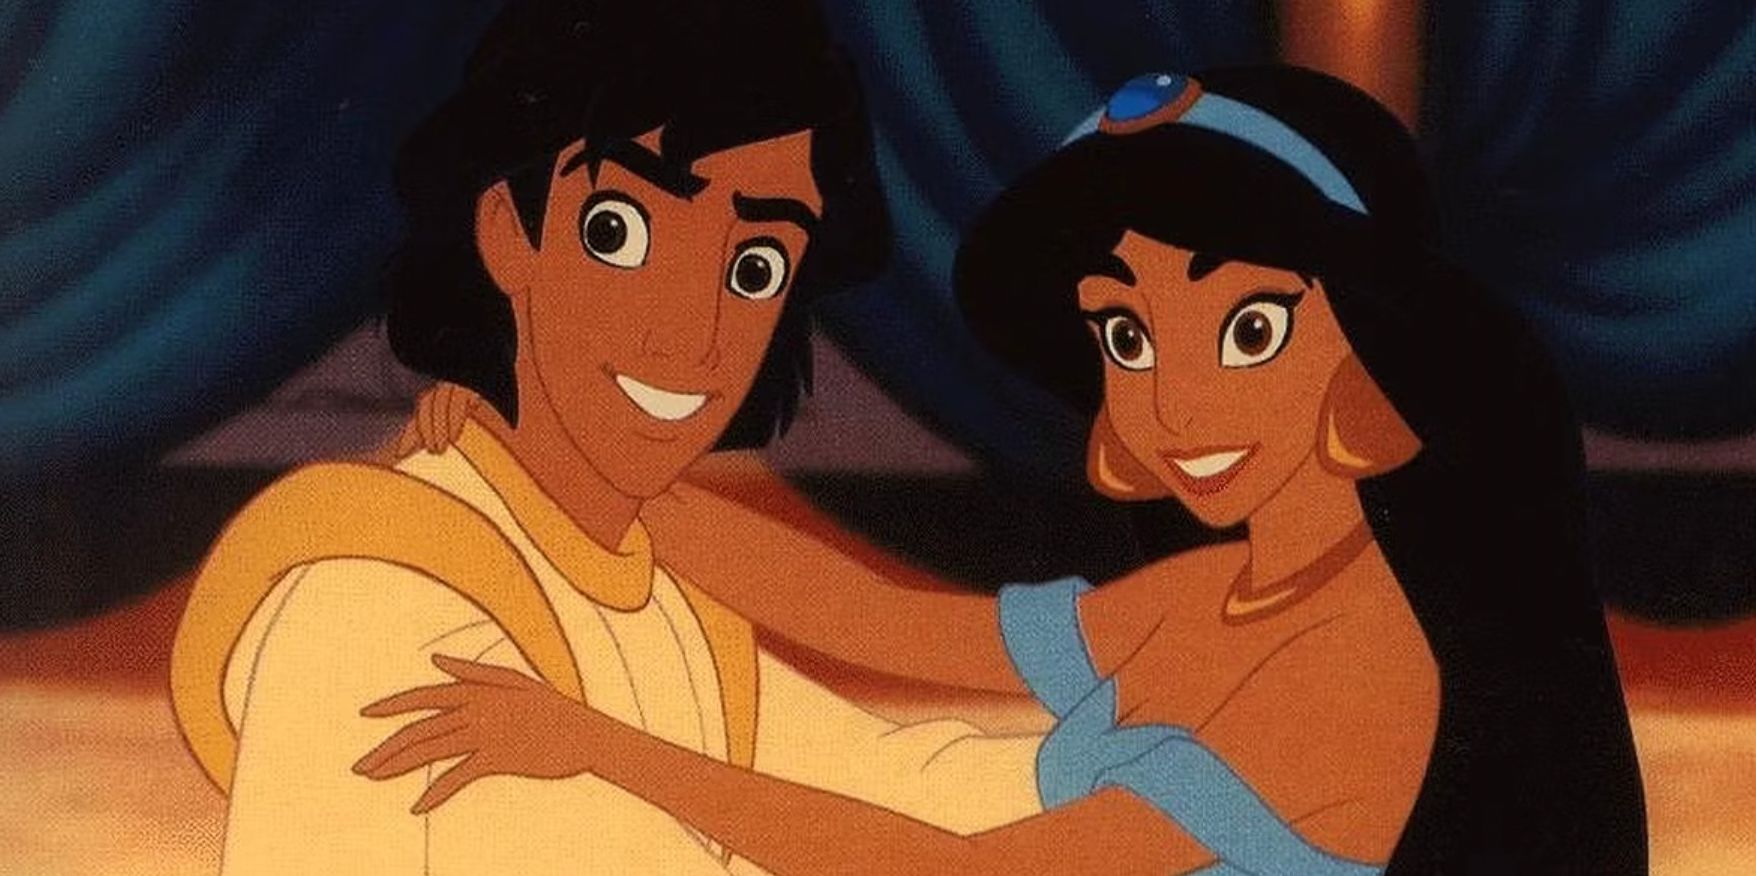 Aladdin and Jasmine with their arms around one another in the animated Aladdin